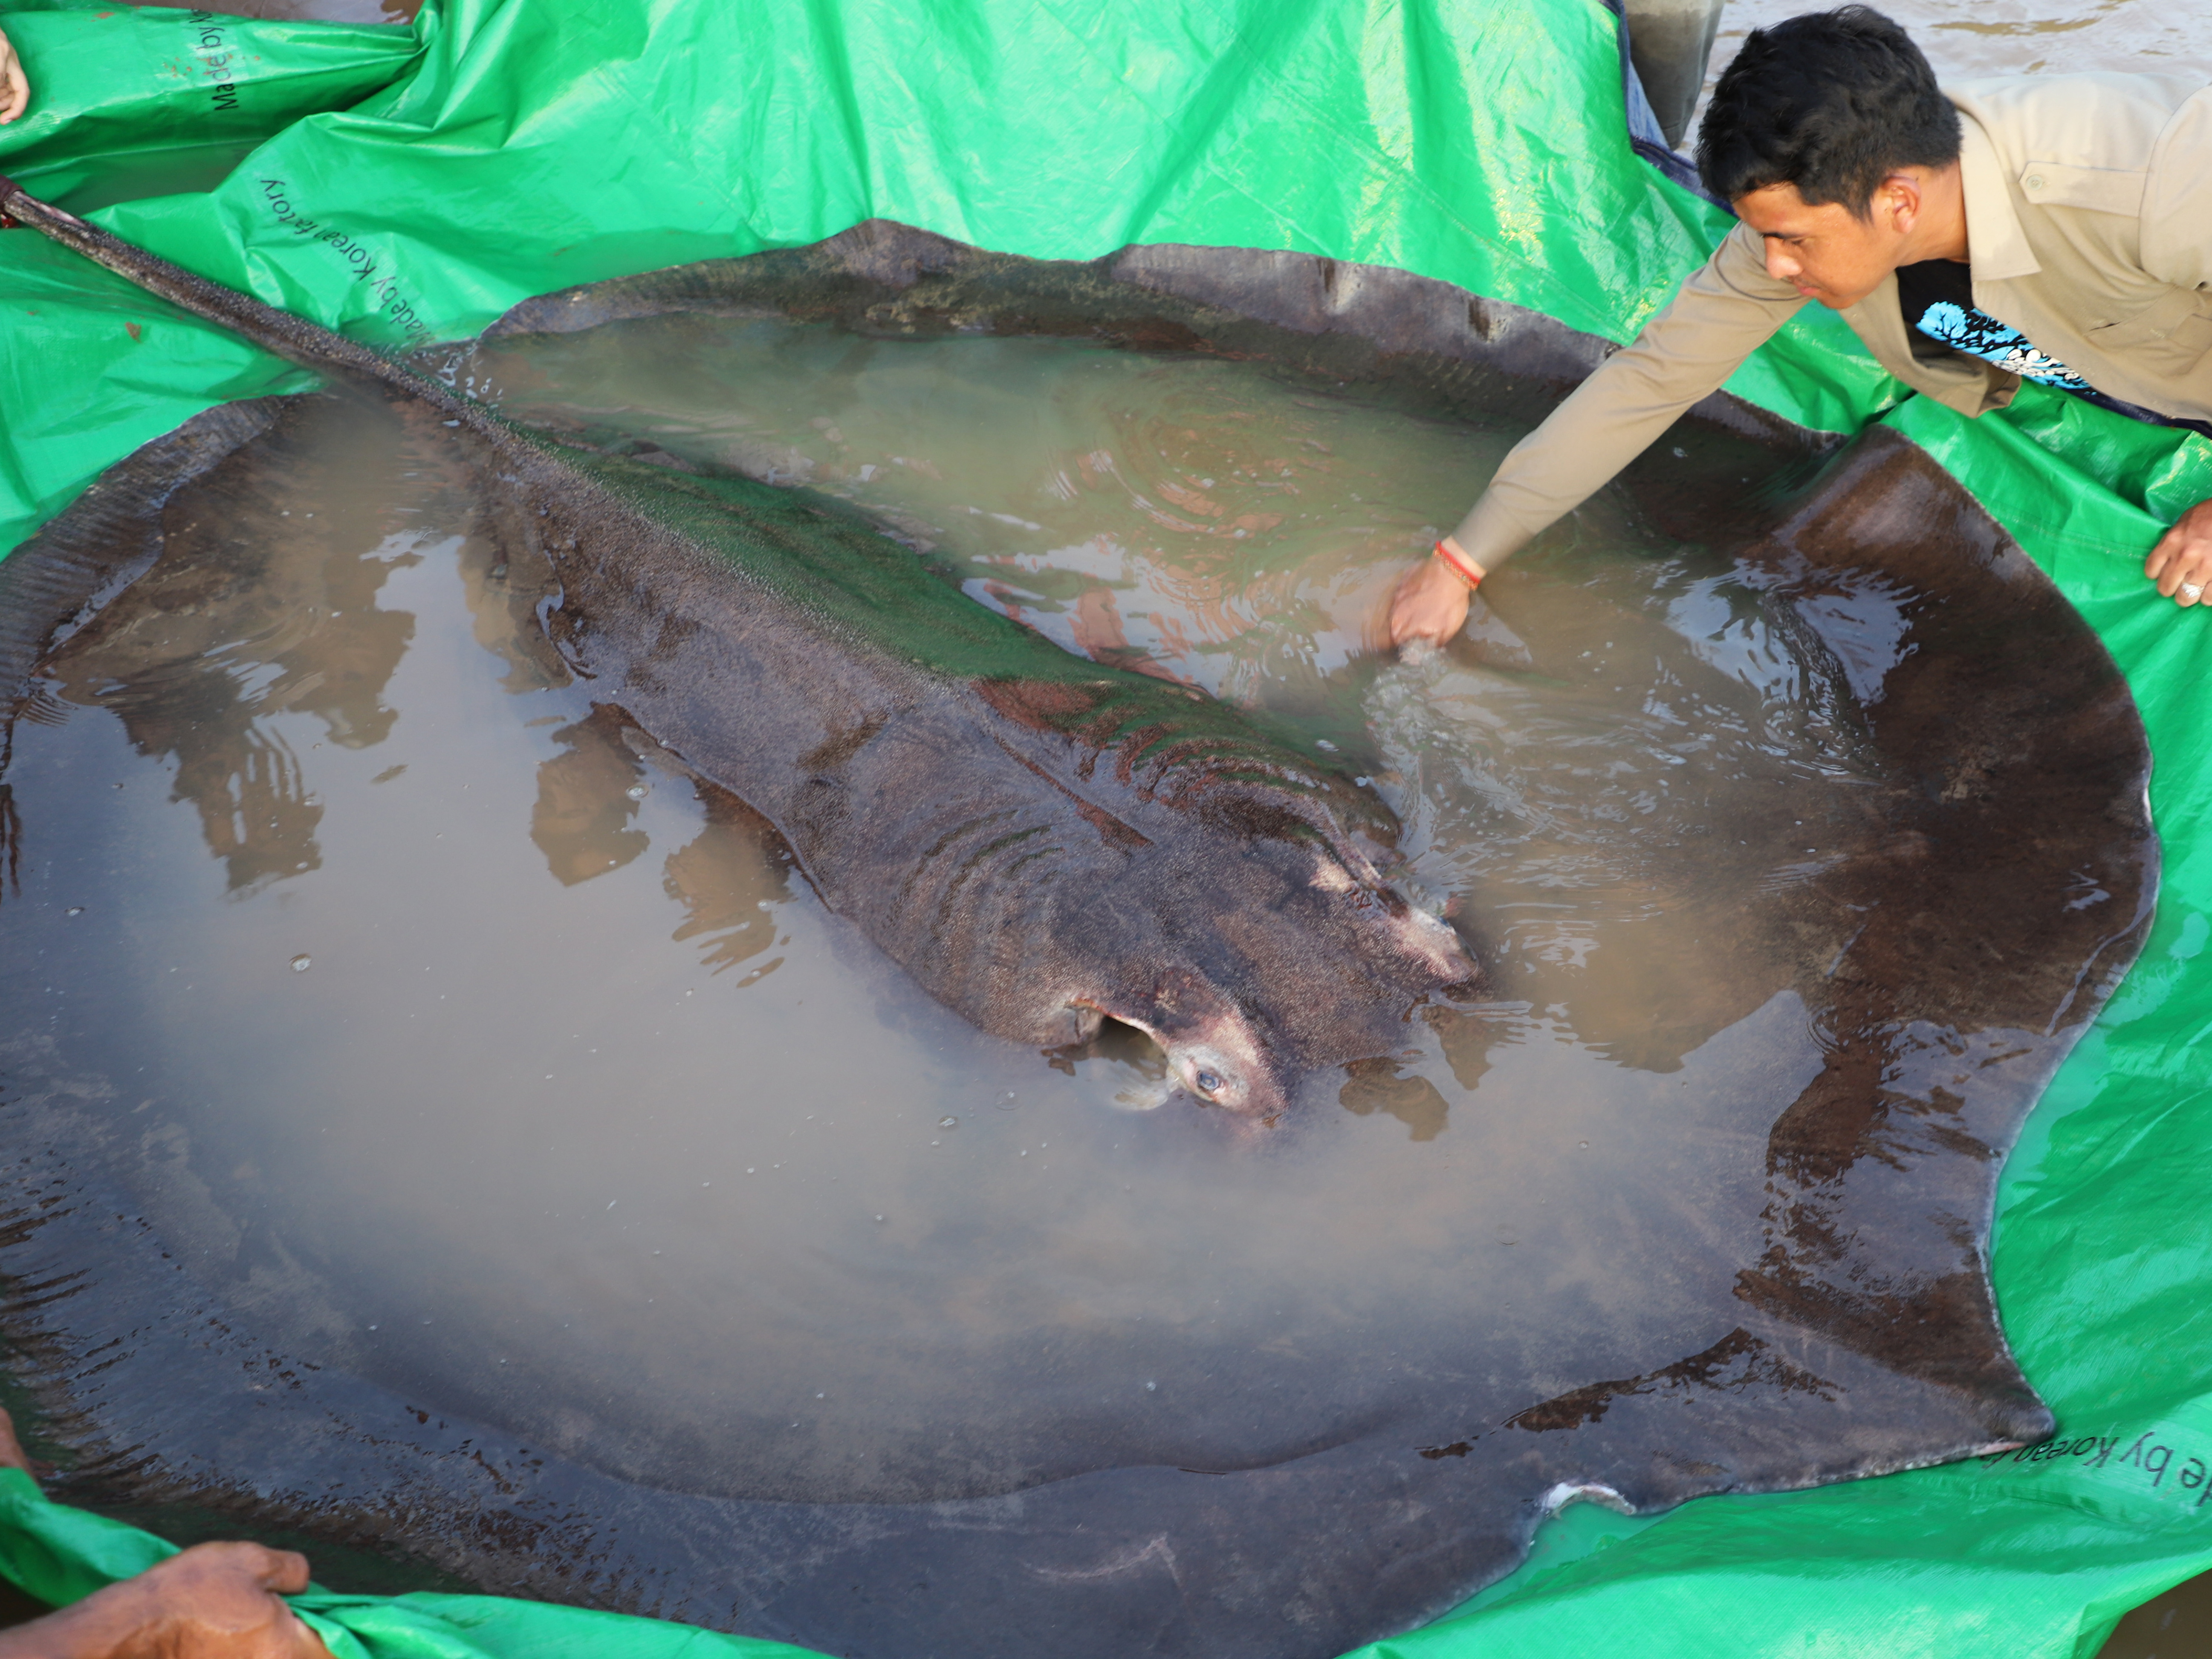 World's largest freshwater fish, almost 660 pounds, found in Cambodia - OPB